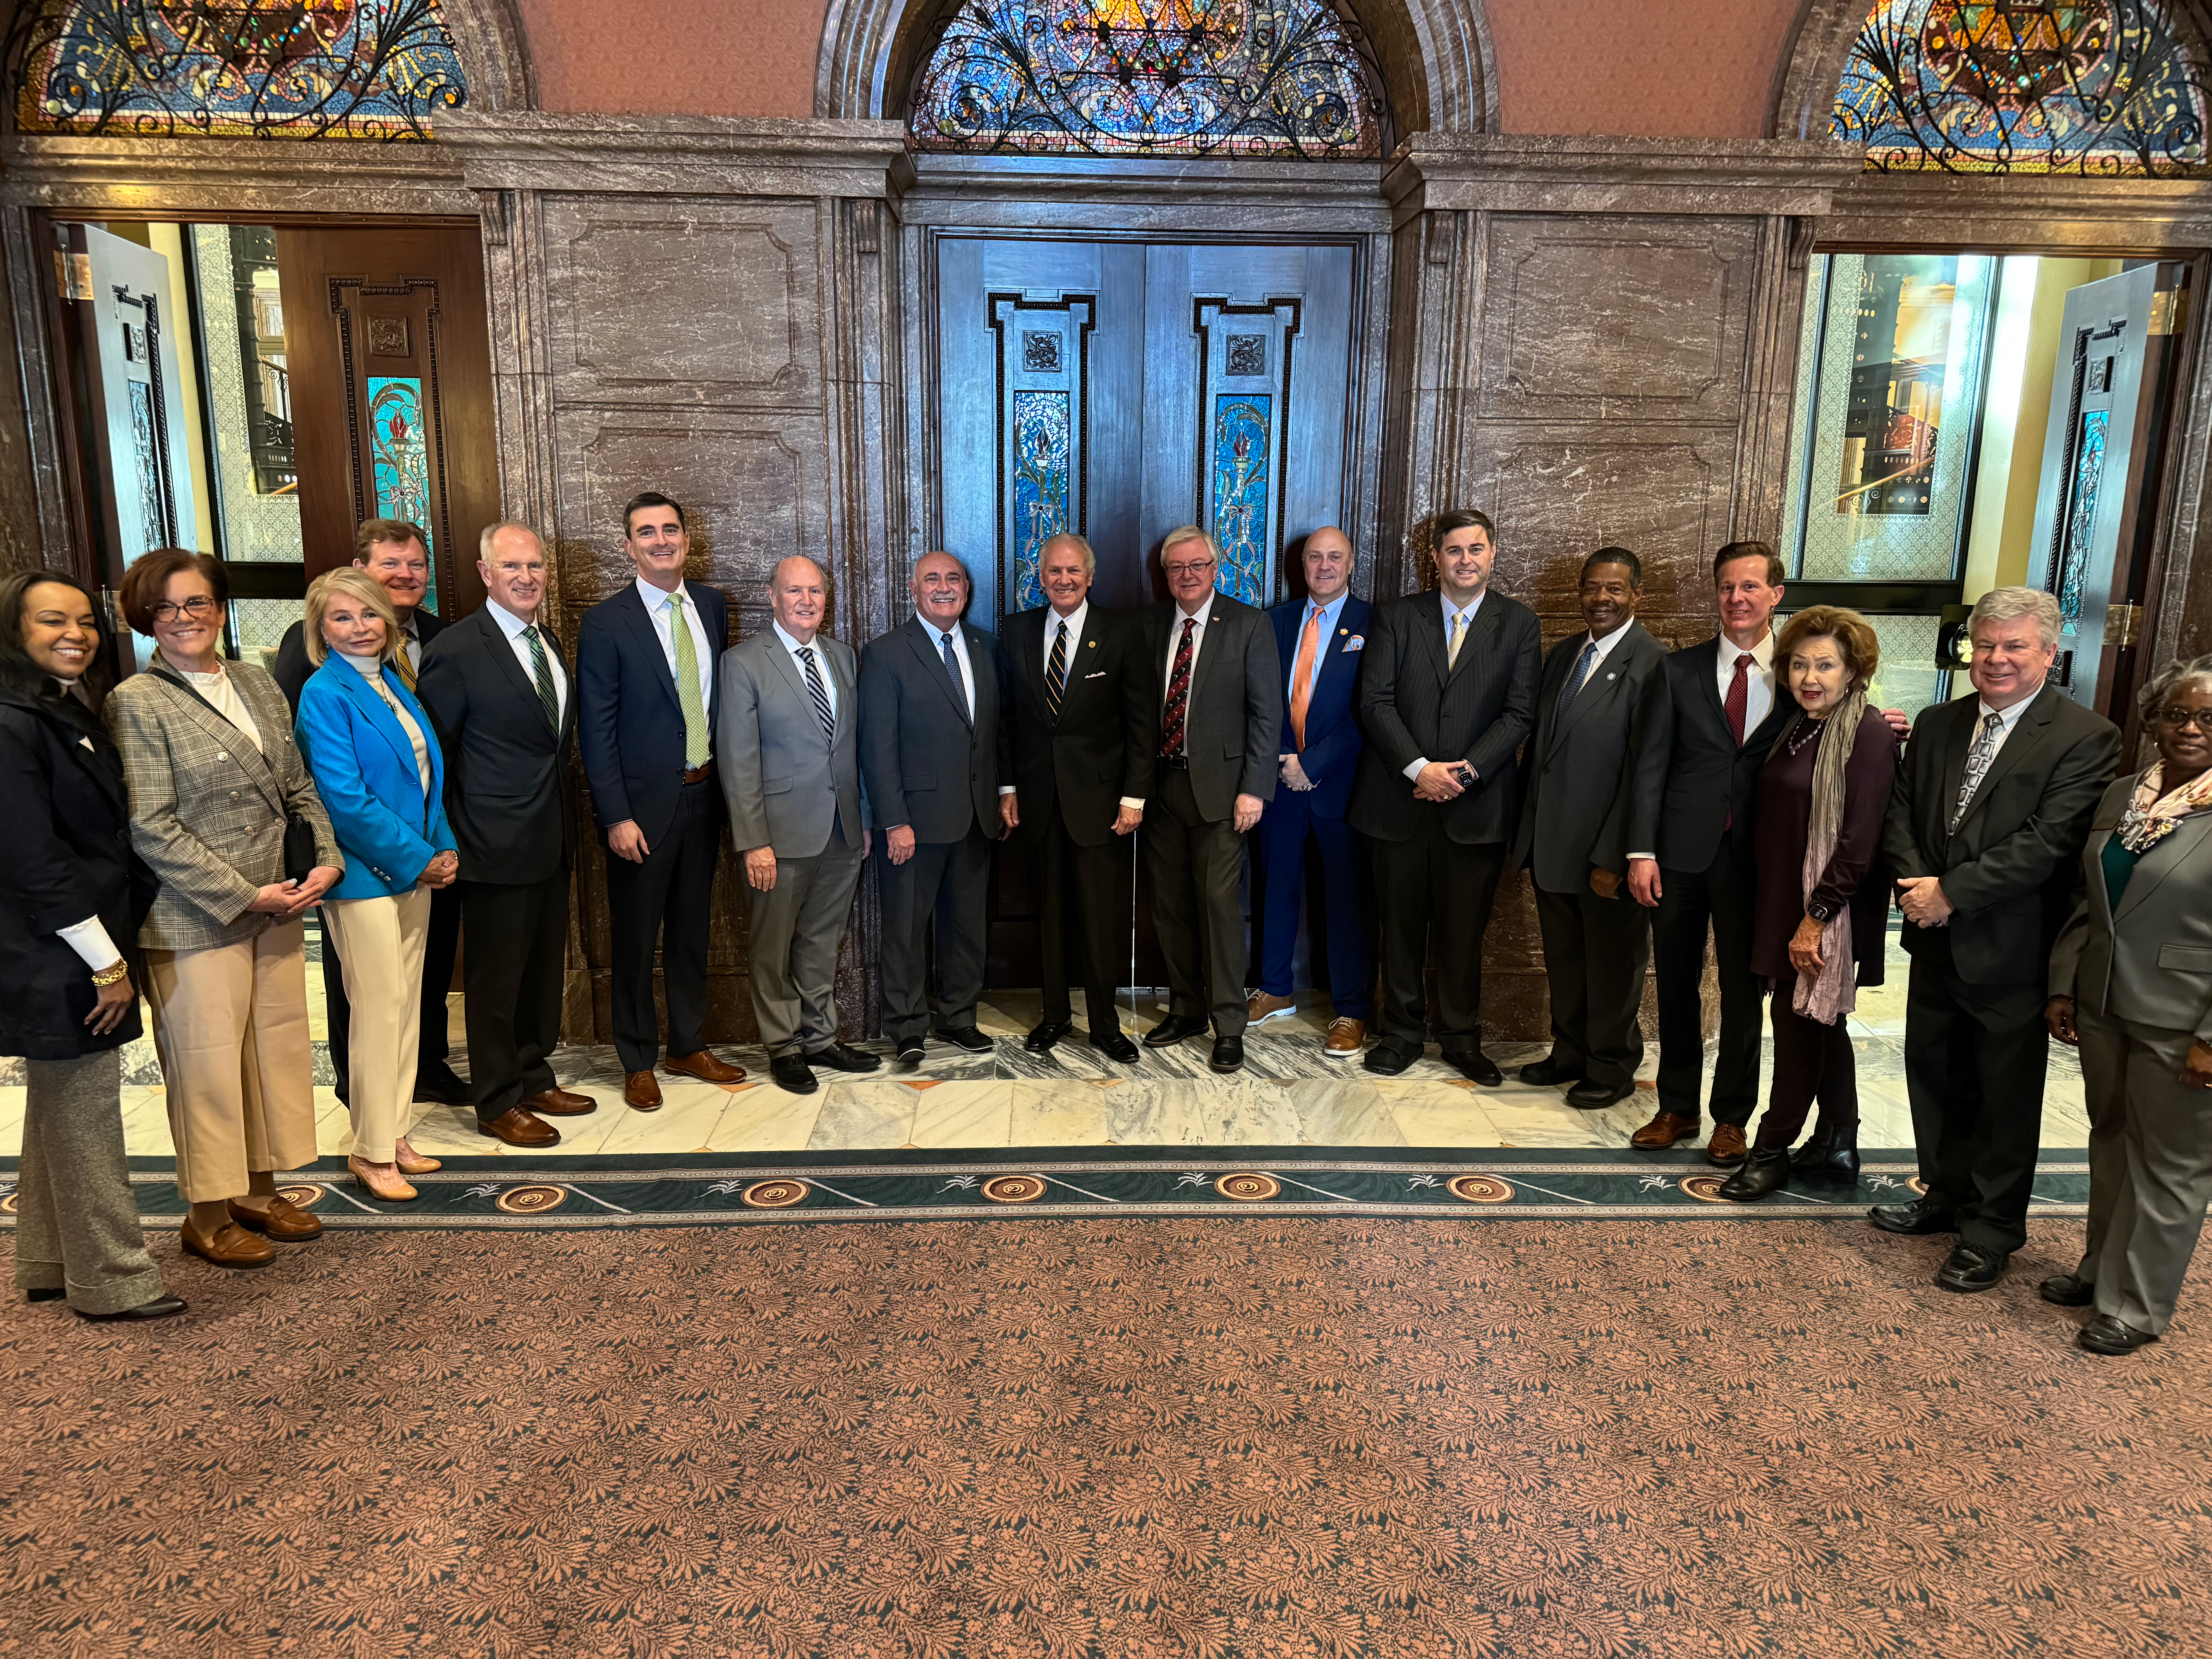 Image of presidents of the SC Technical College System with Governor Henry McMaster on the second floor of the SC Statehouse.